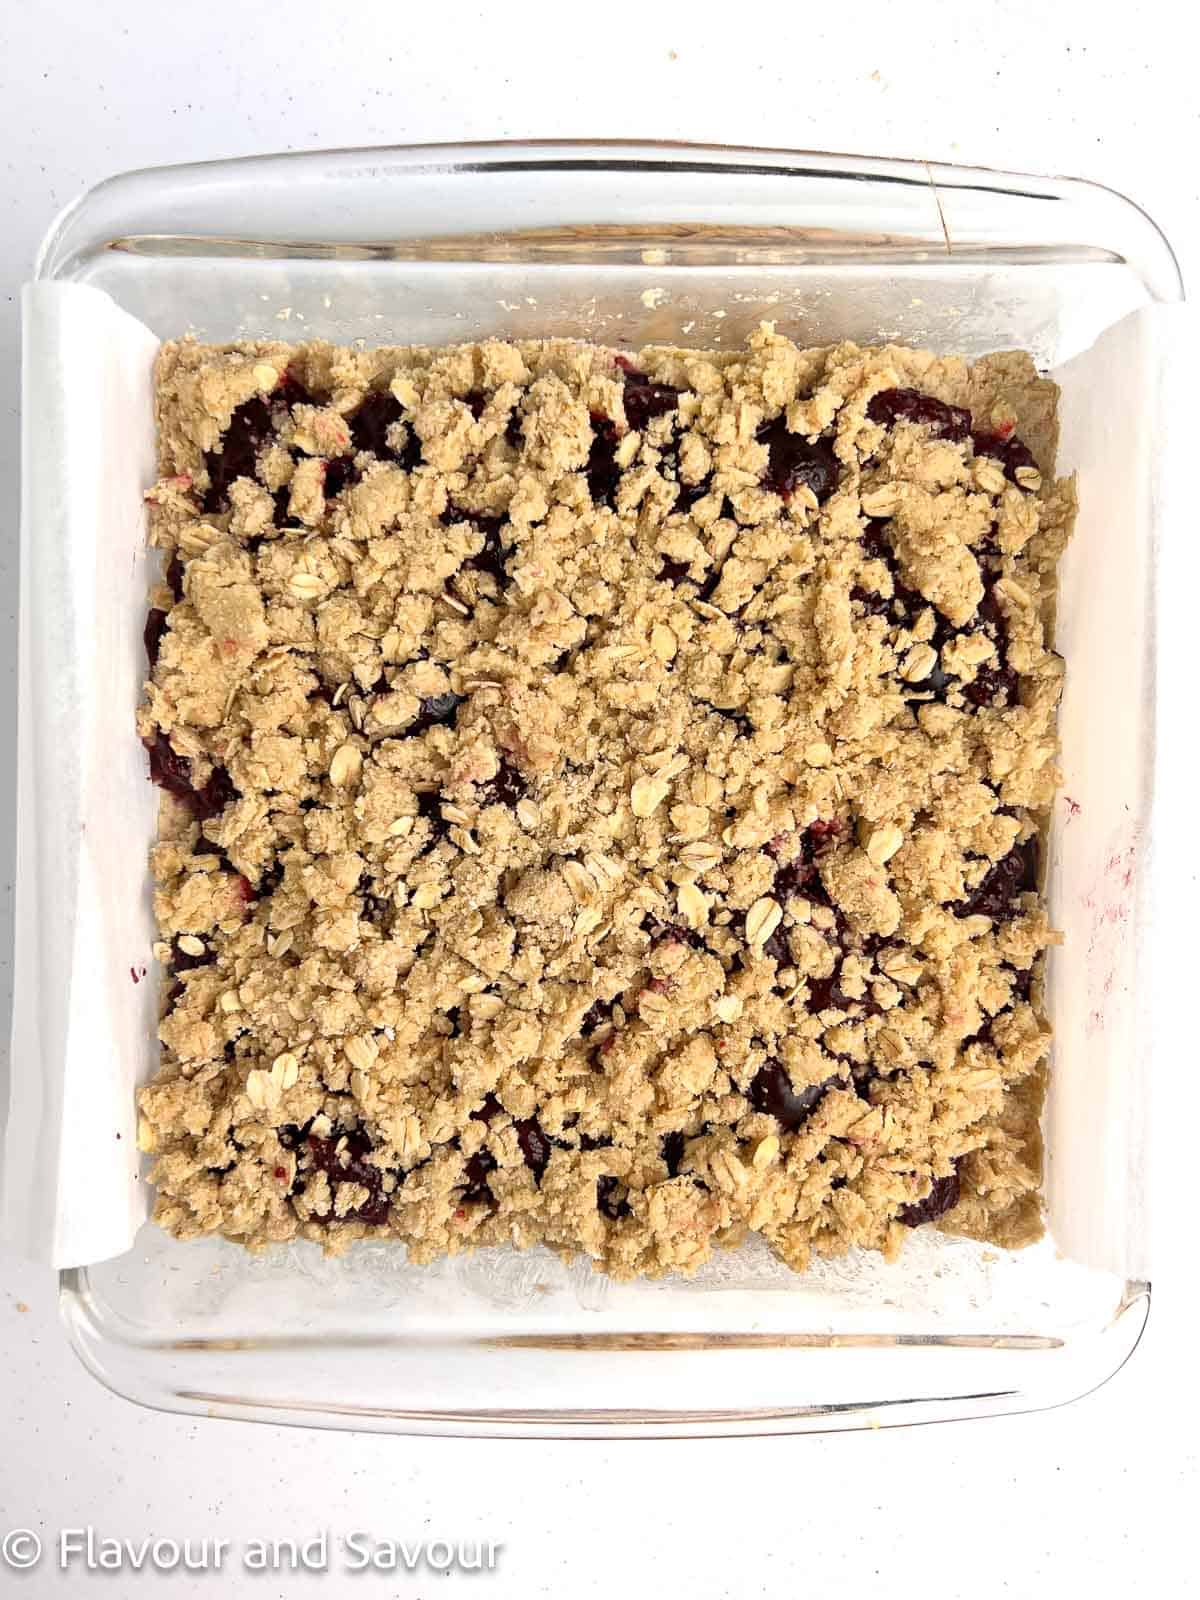 Crumble topping sprinkled on top of cherry filling to make cherry oatmeal crumble bars.